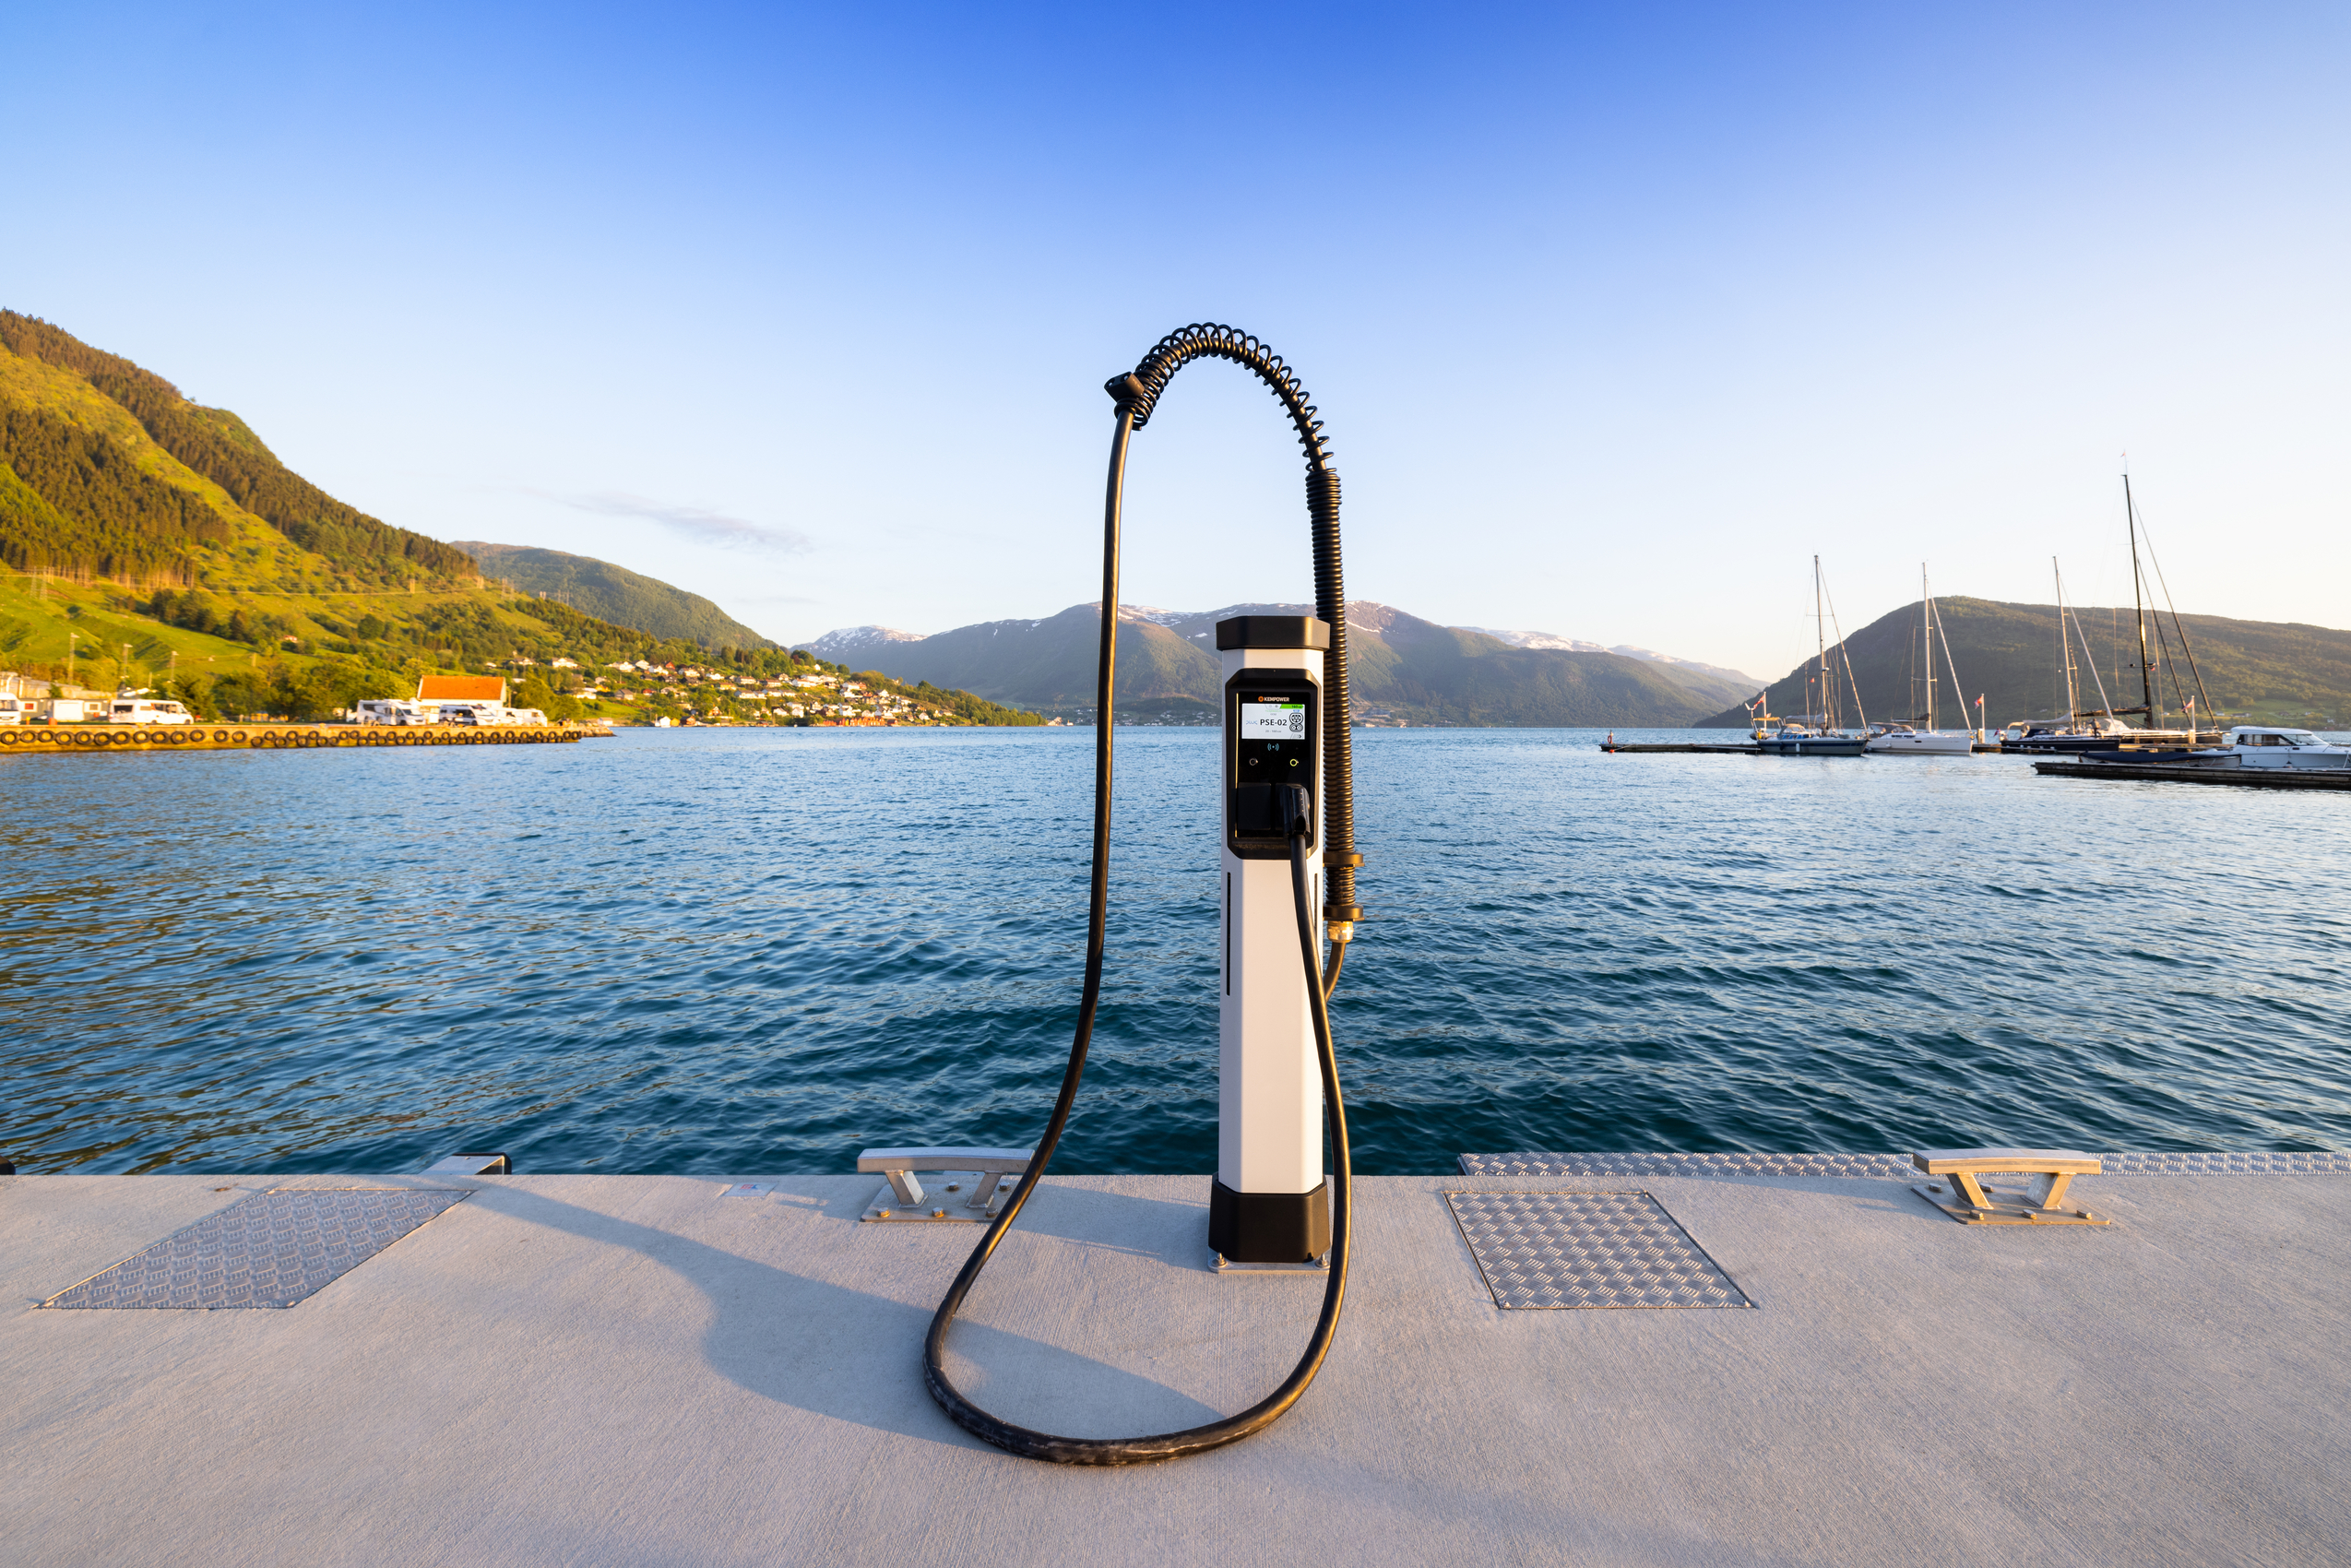 Kempower satellite charger for electric boats